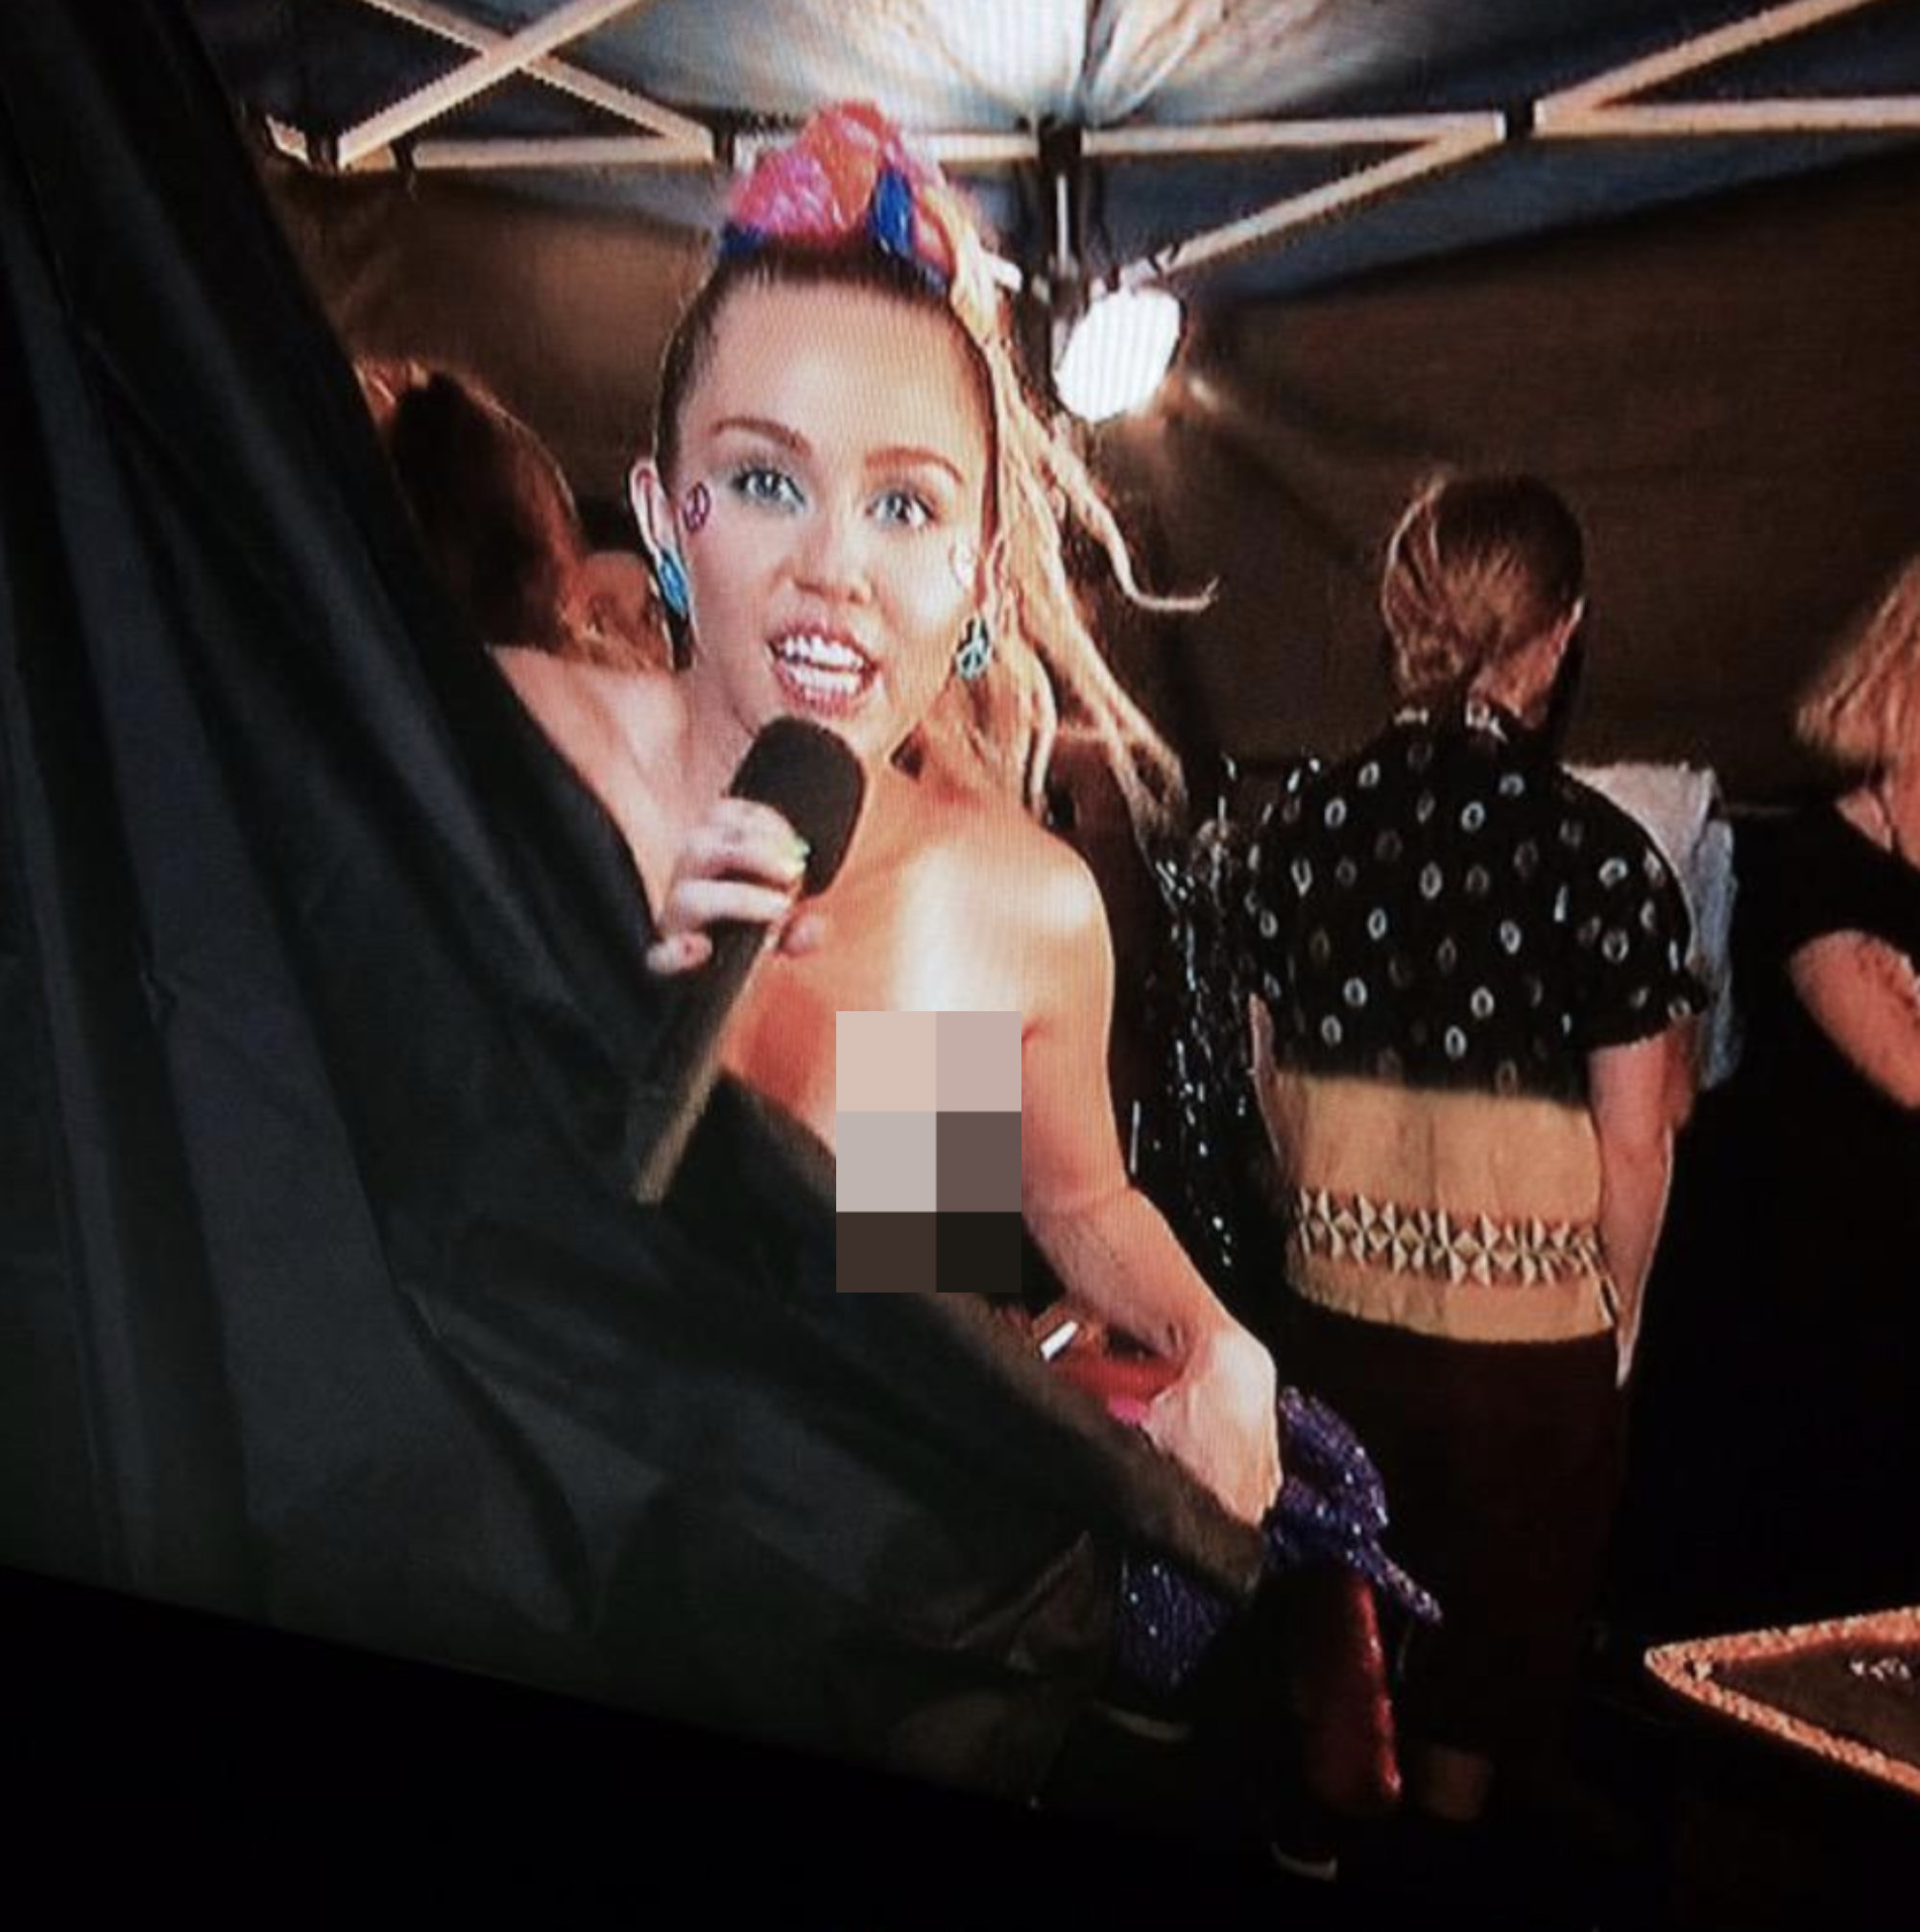 Miley behind the curtain with her exposed breast pixelated